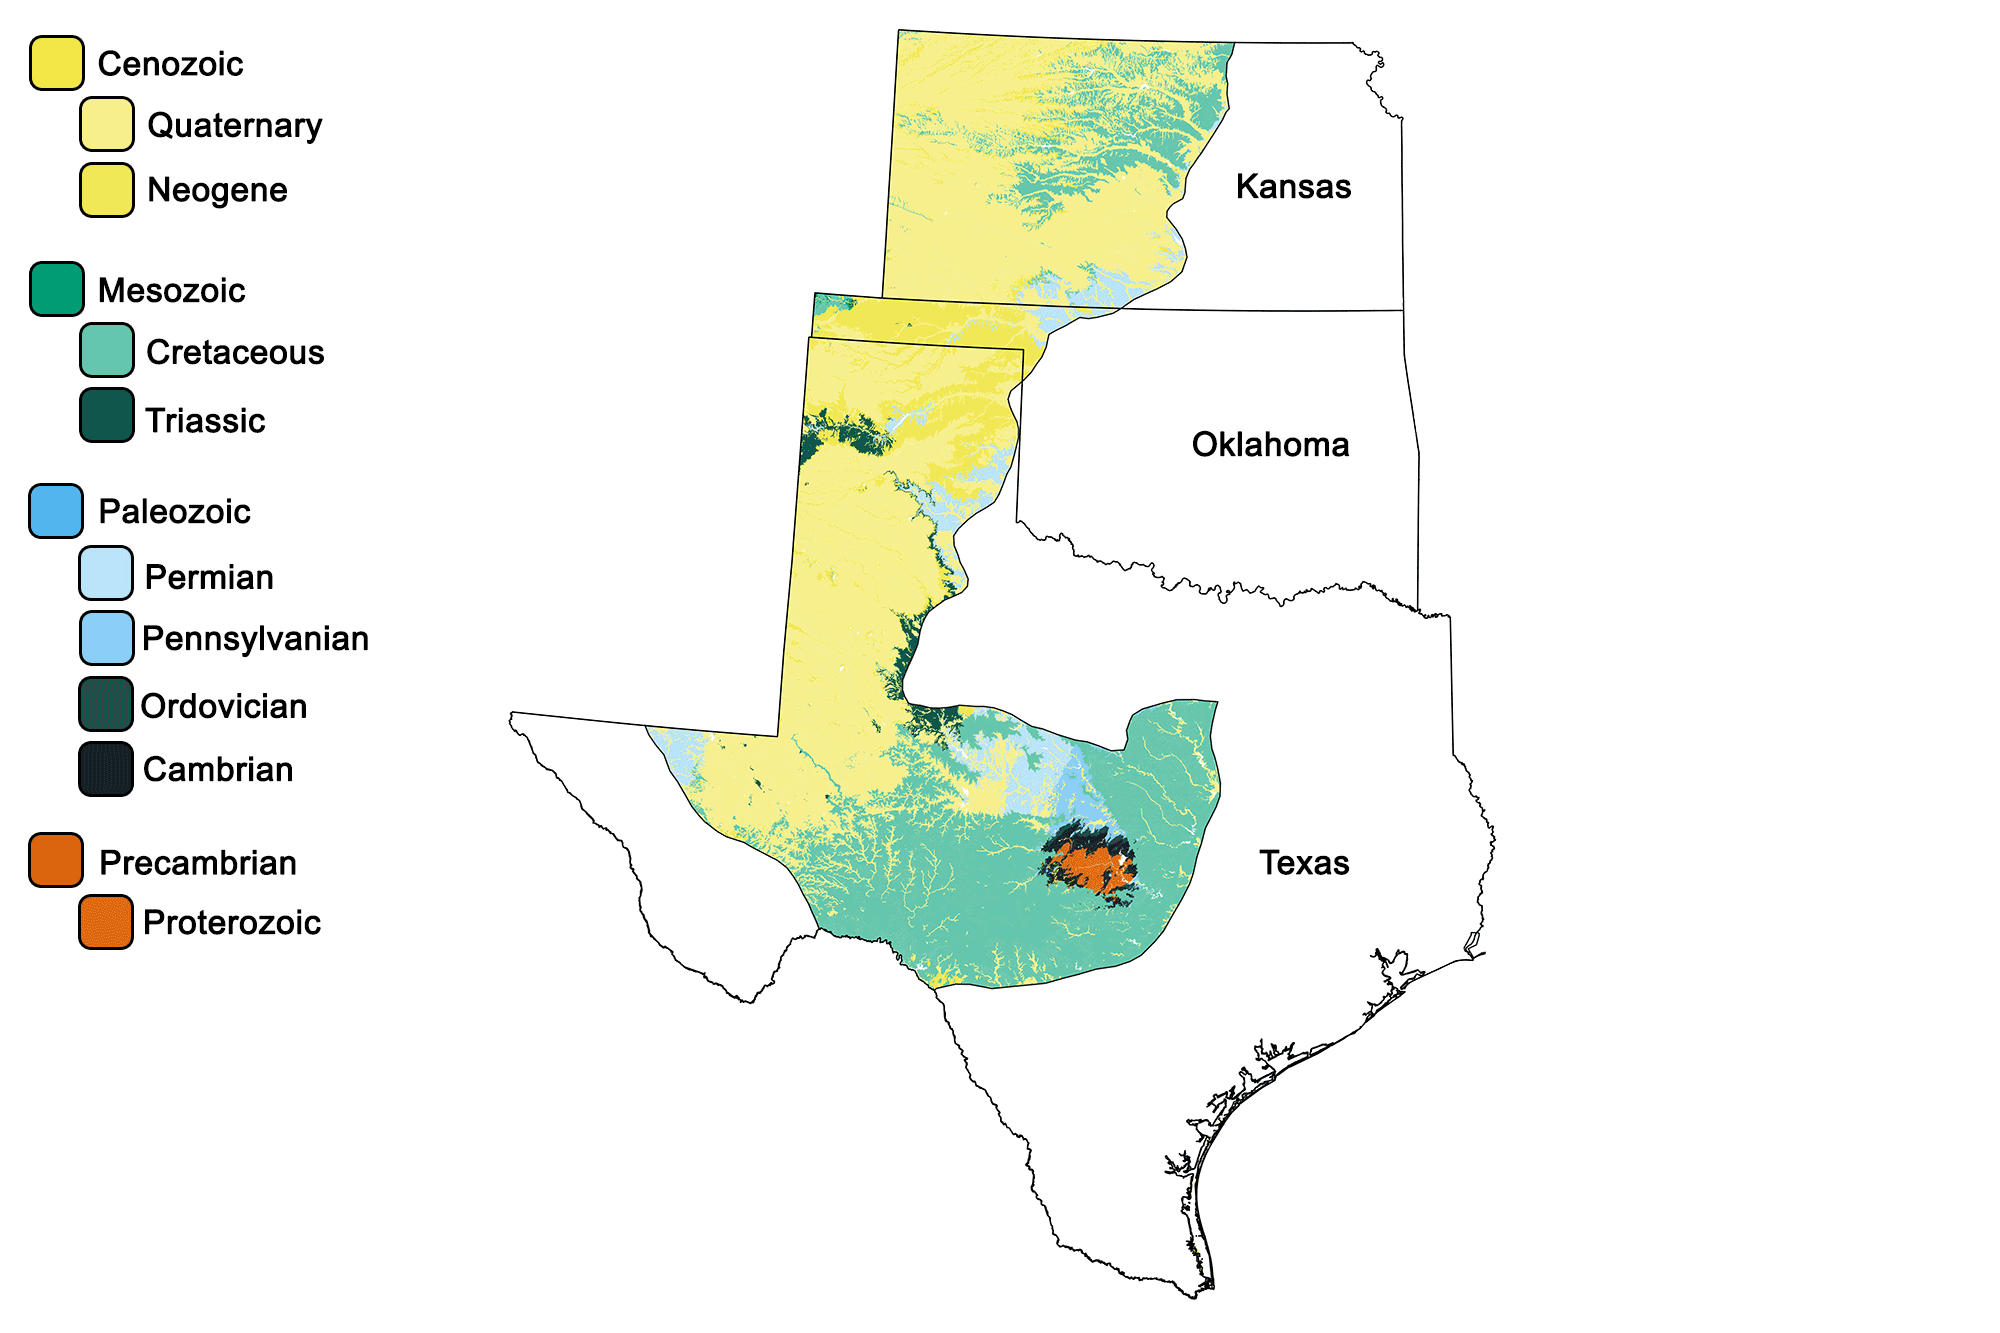 Geologic map of the Great Plains region of the South-Central United States.